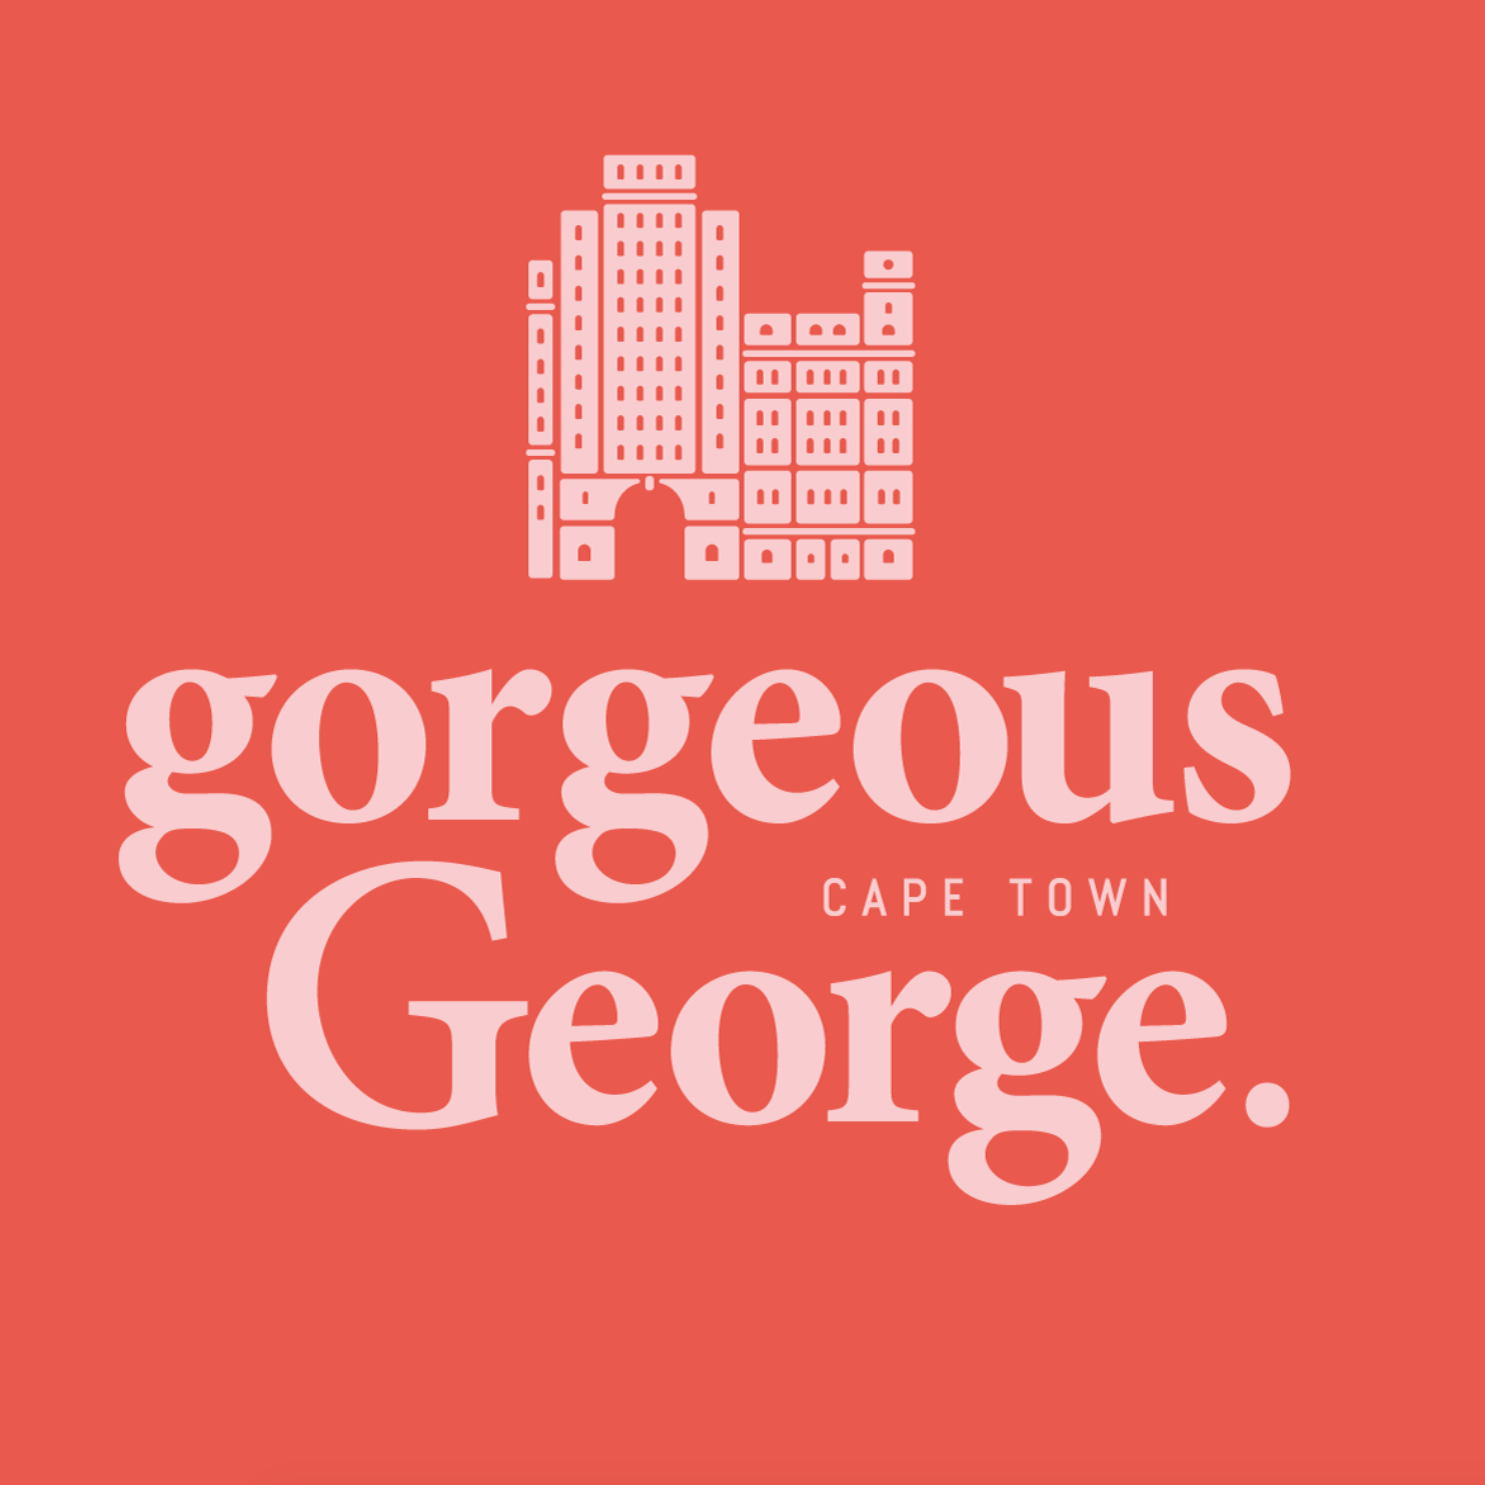 Image result for Gorgeous George Hotel Cape Town